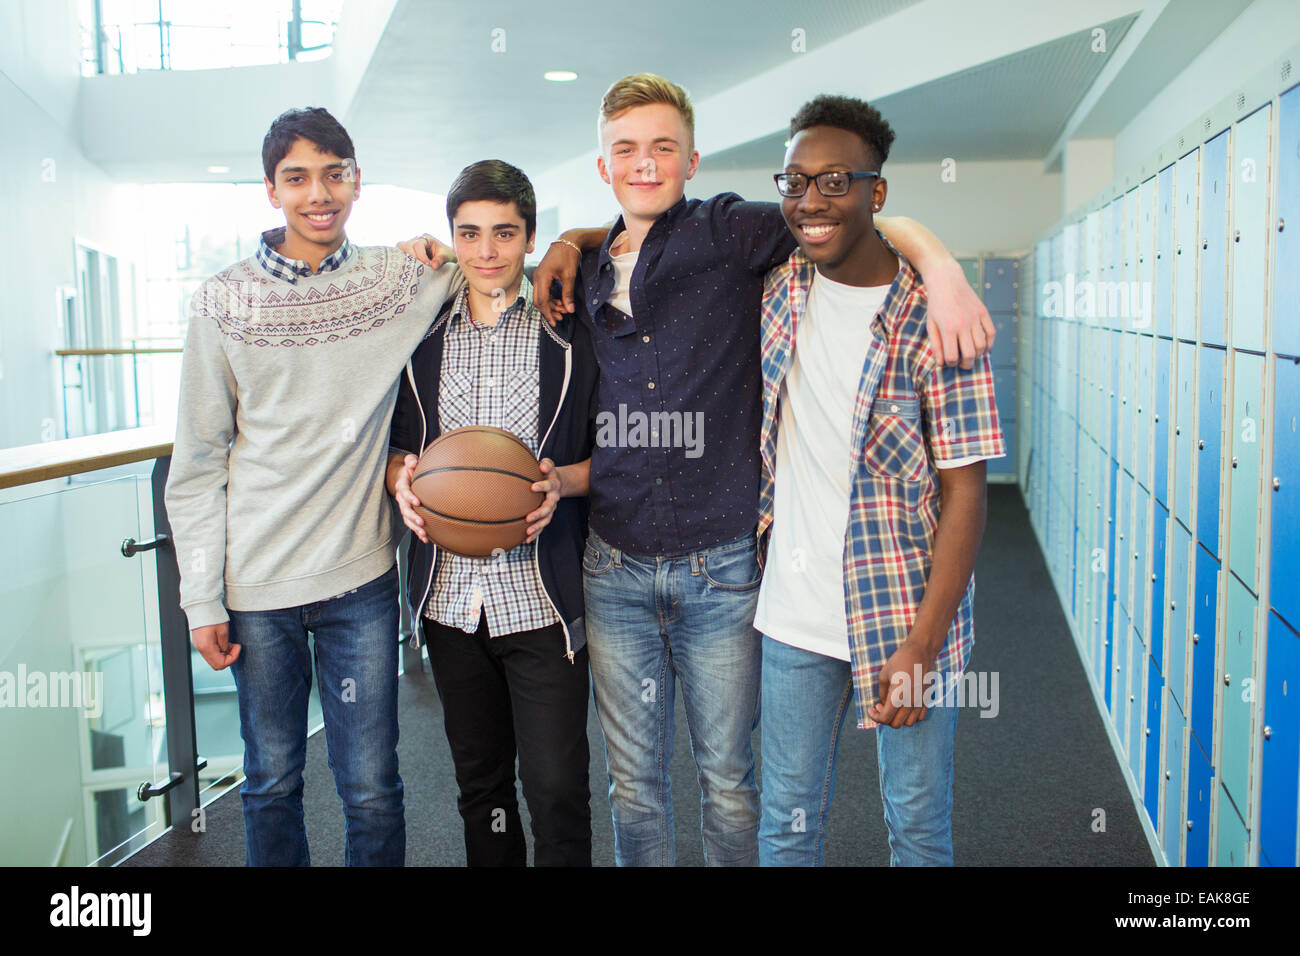 Group portrait of male students holding basketball in school corridor Stock Photo